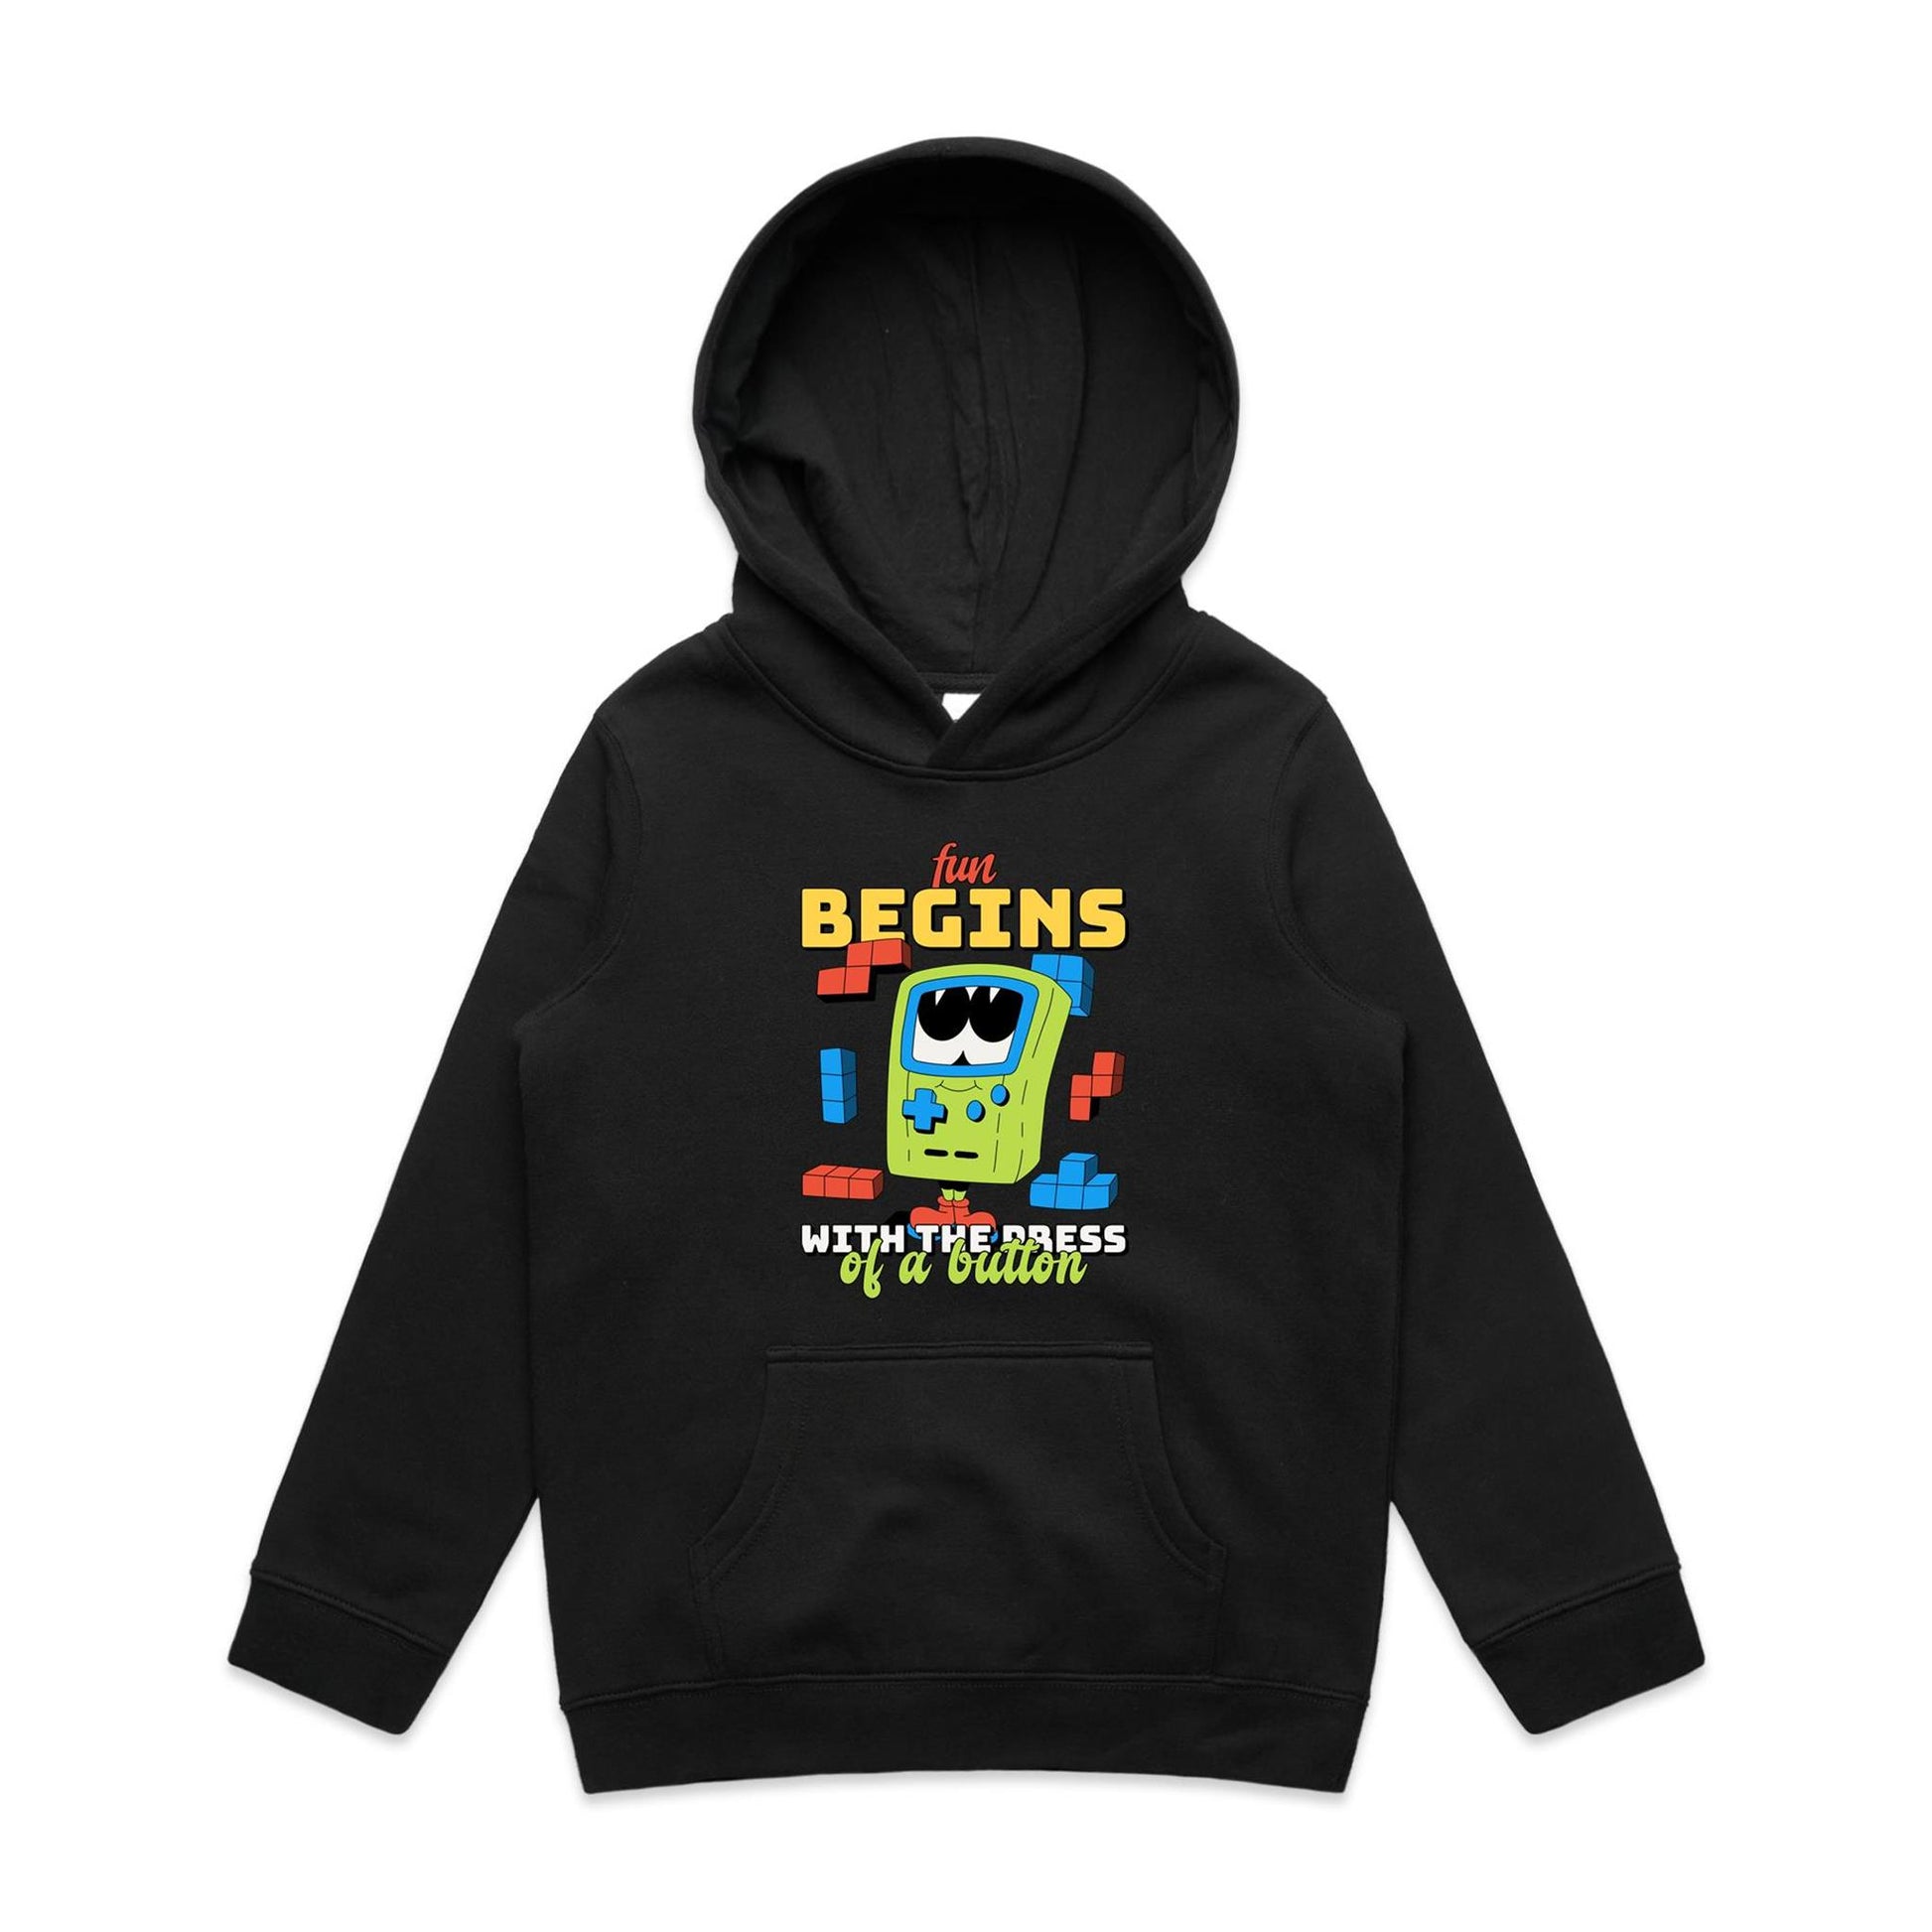 Fun Begins With The Press Of A Button, Games - Youth Supply Hood Black Kids Hoodie Games